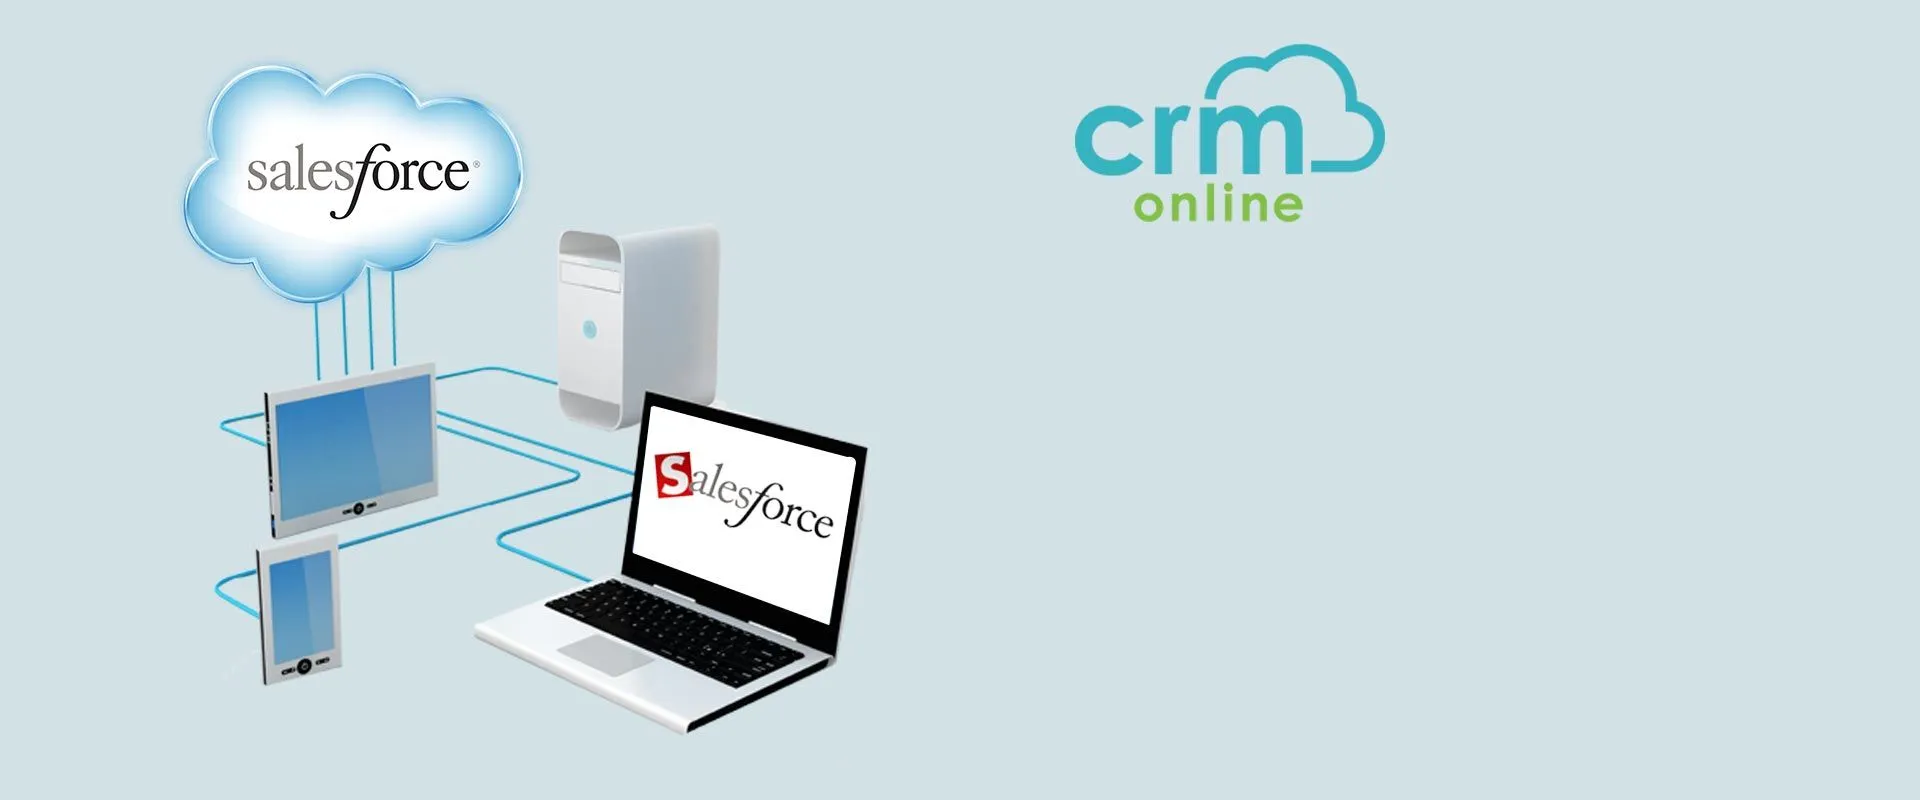 salesforce crm consulting 